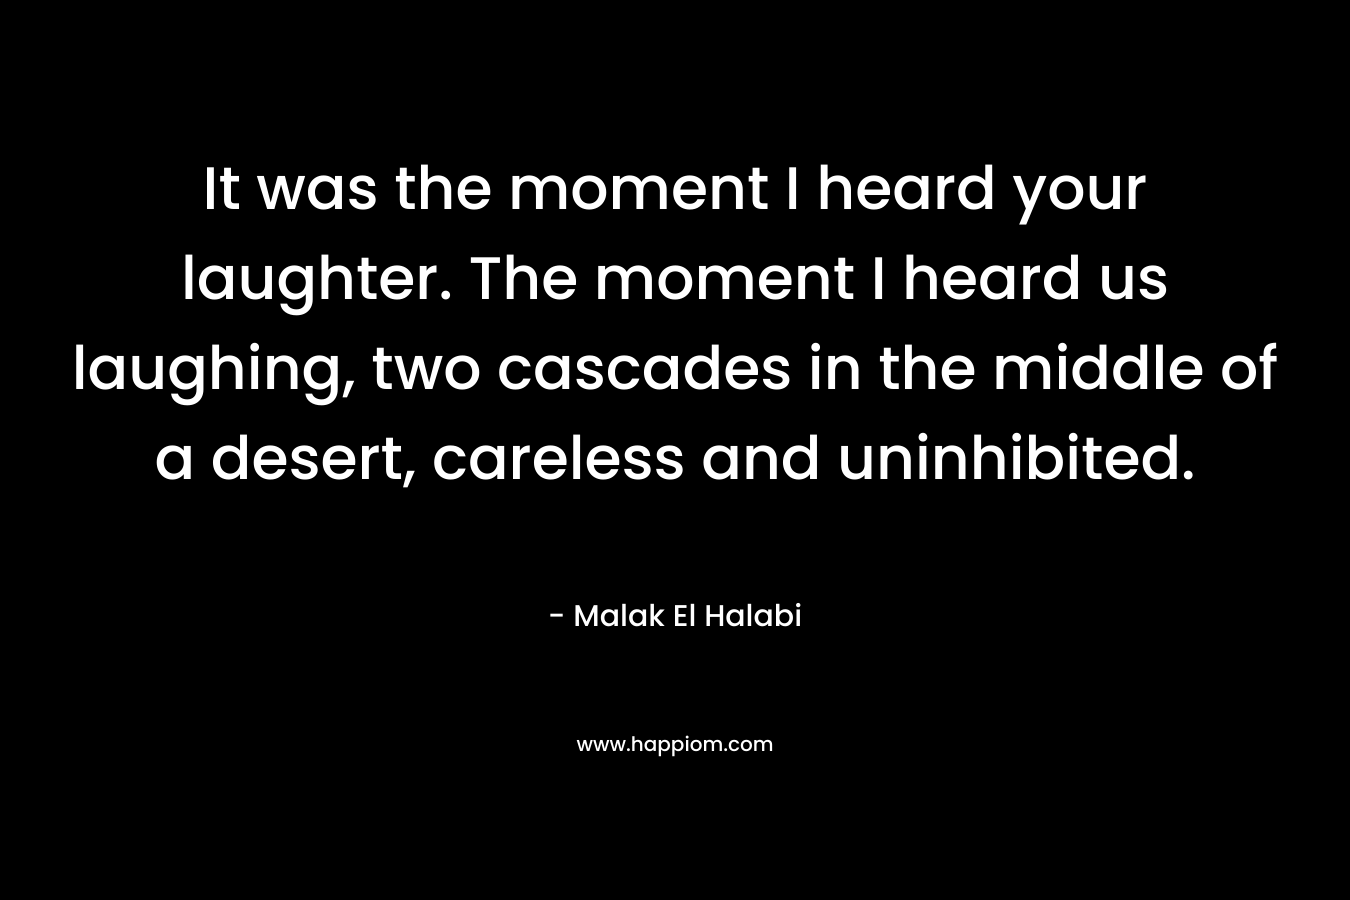 It was the moment I heard your laughter. The moment I heard us laughing, two cascades in the middle of a desert, careless and uninhibited. – Malak El Halabi